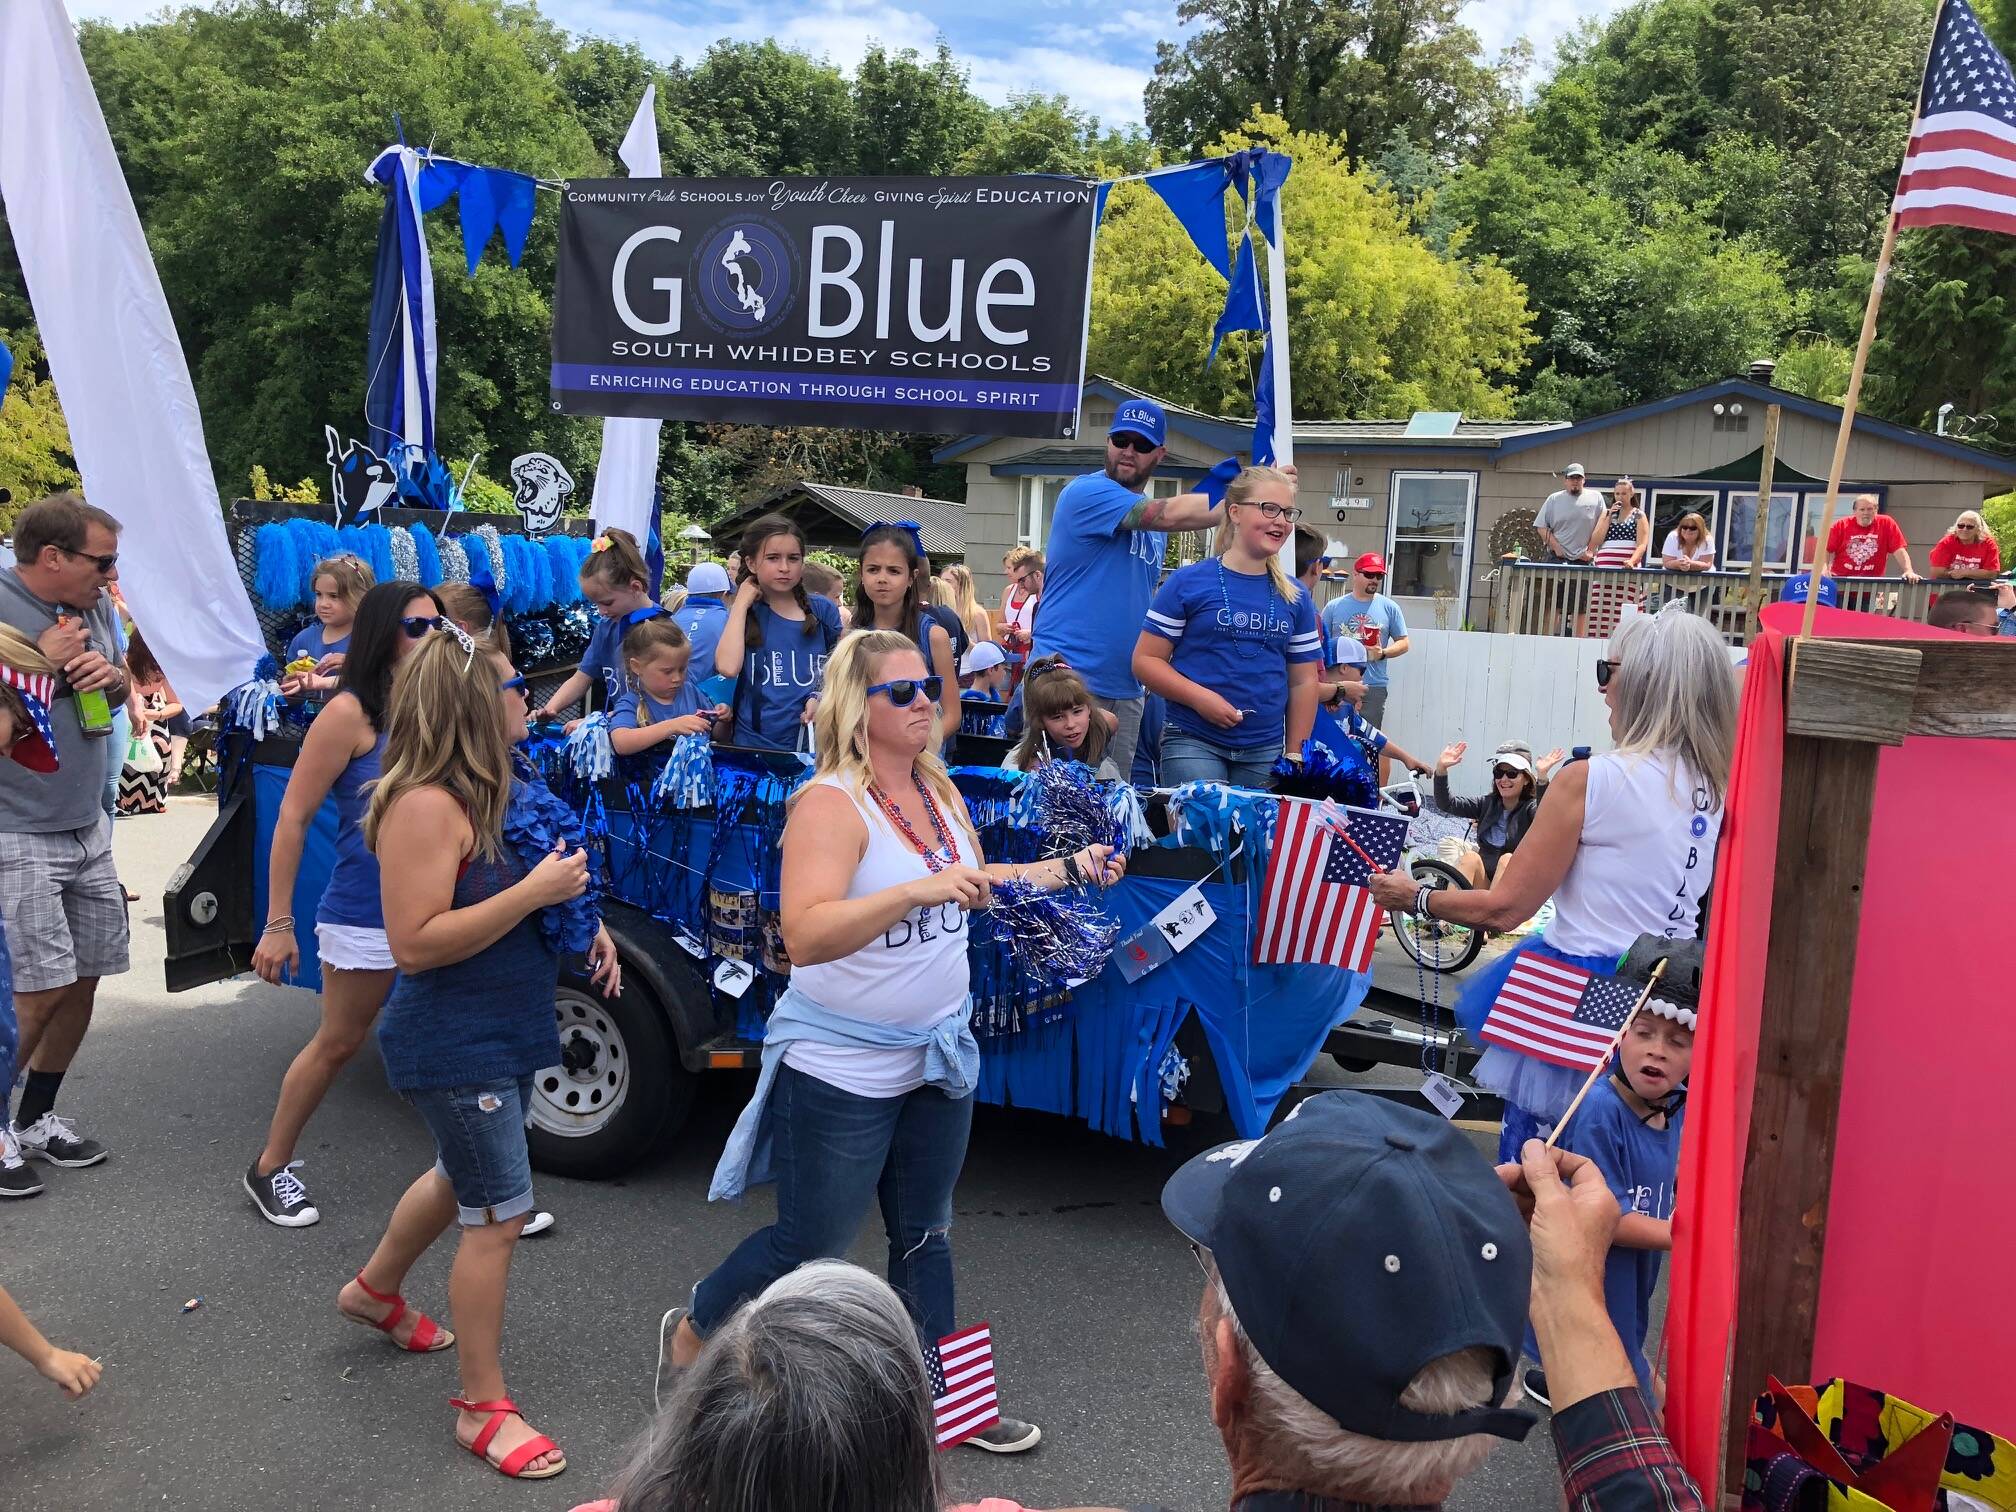 Photos provided
Participants at a former Maxwelton Fourth of July Parade in 2018.